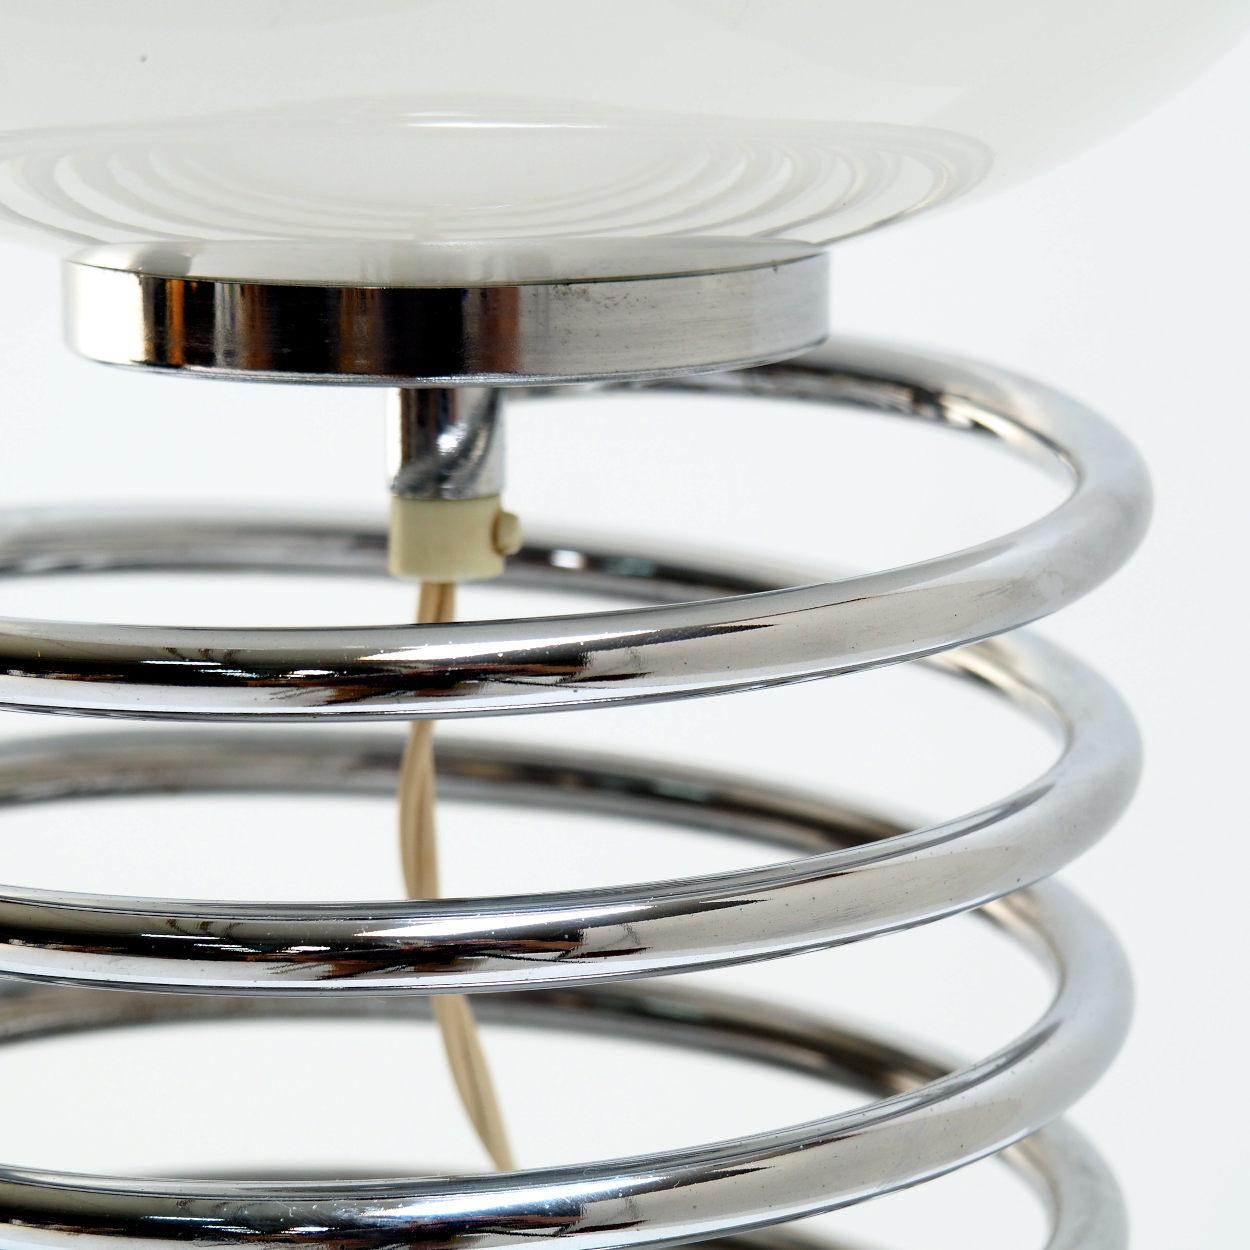 Beautifully designed lamp in the style of the well-known spiral lamp that Ingo Maurer designed for his company Design M. Maurer designed this new type of lamp in the late 1960s.

Of course, like most good ideas, the Ingo Maurer spiral lamp was